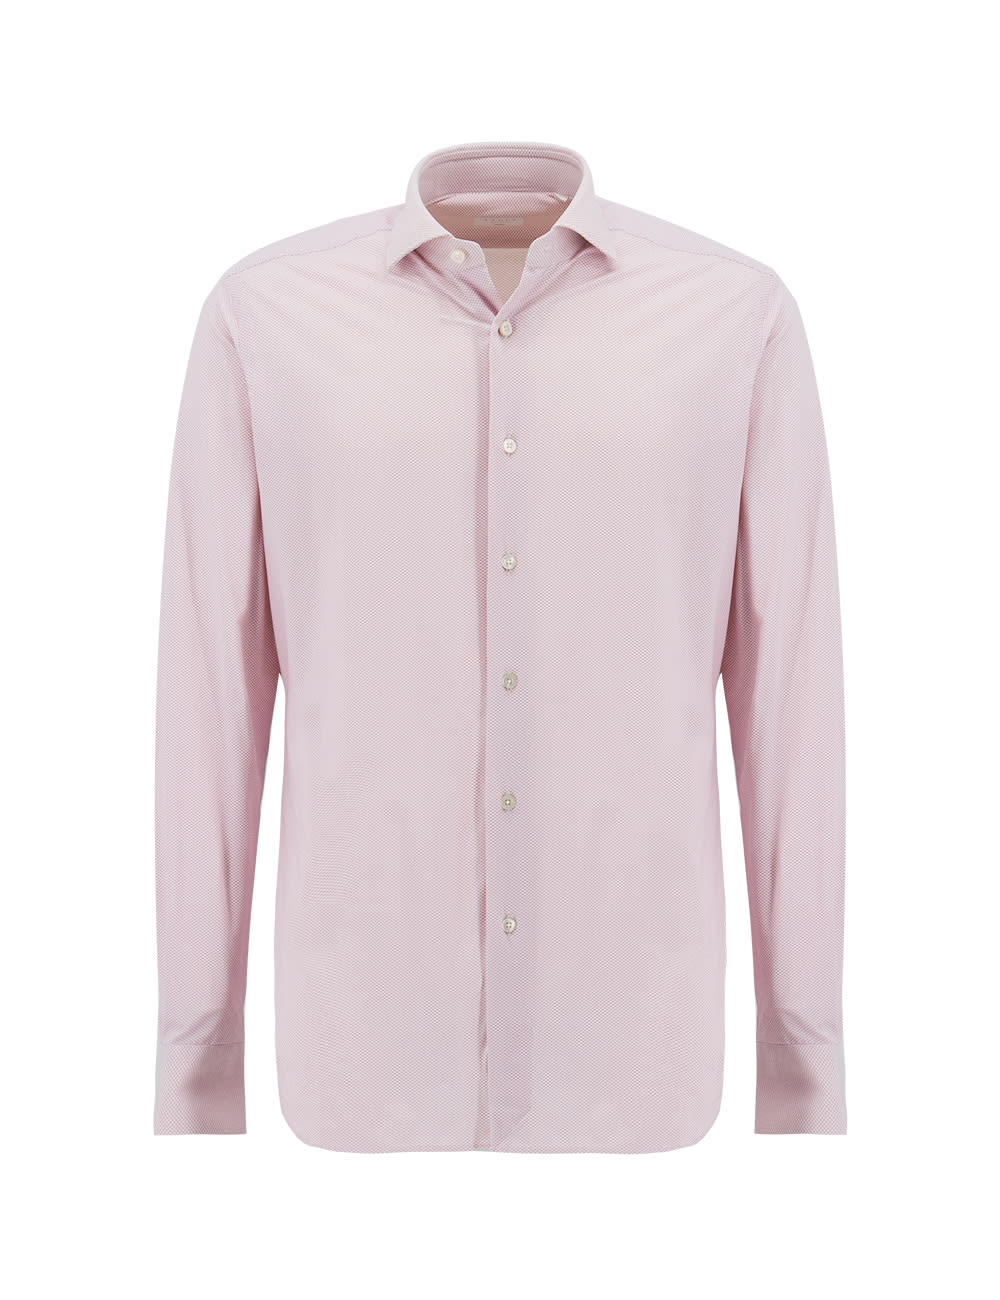 Xacus Shirt In Pink And White Fantasy